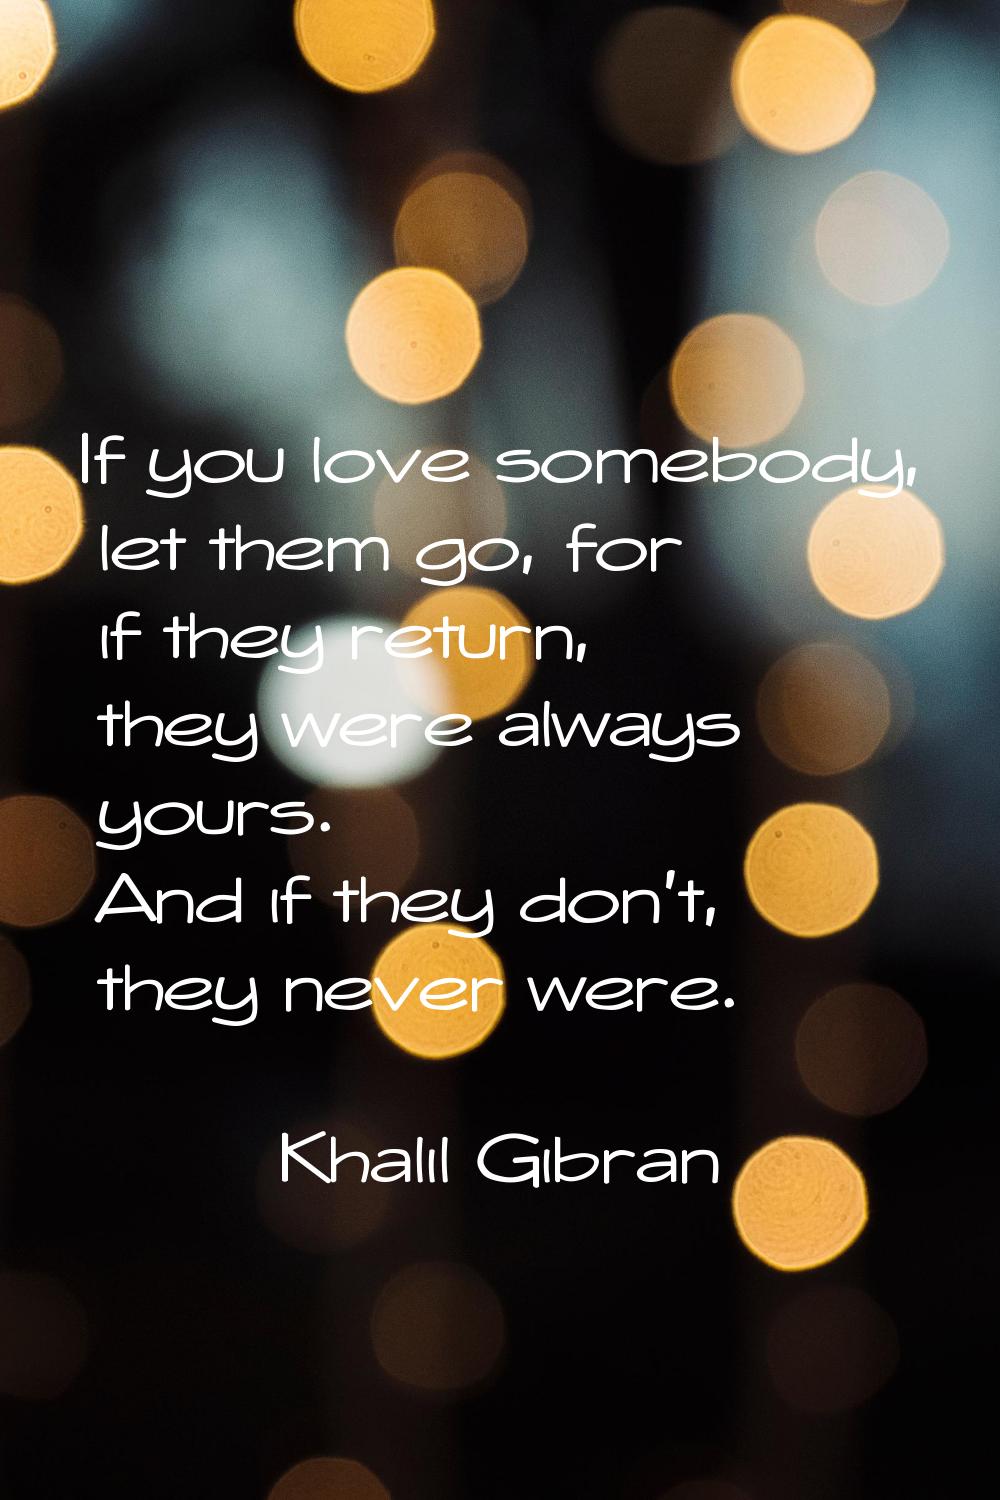 If you love somebody, let them go, for if they return, they were always yours. And if they don't, t